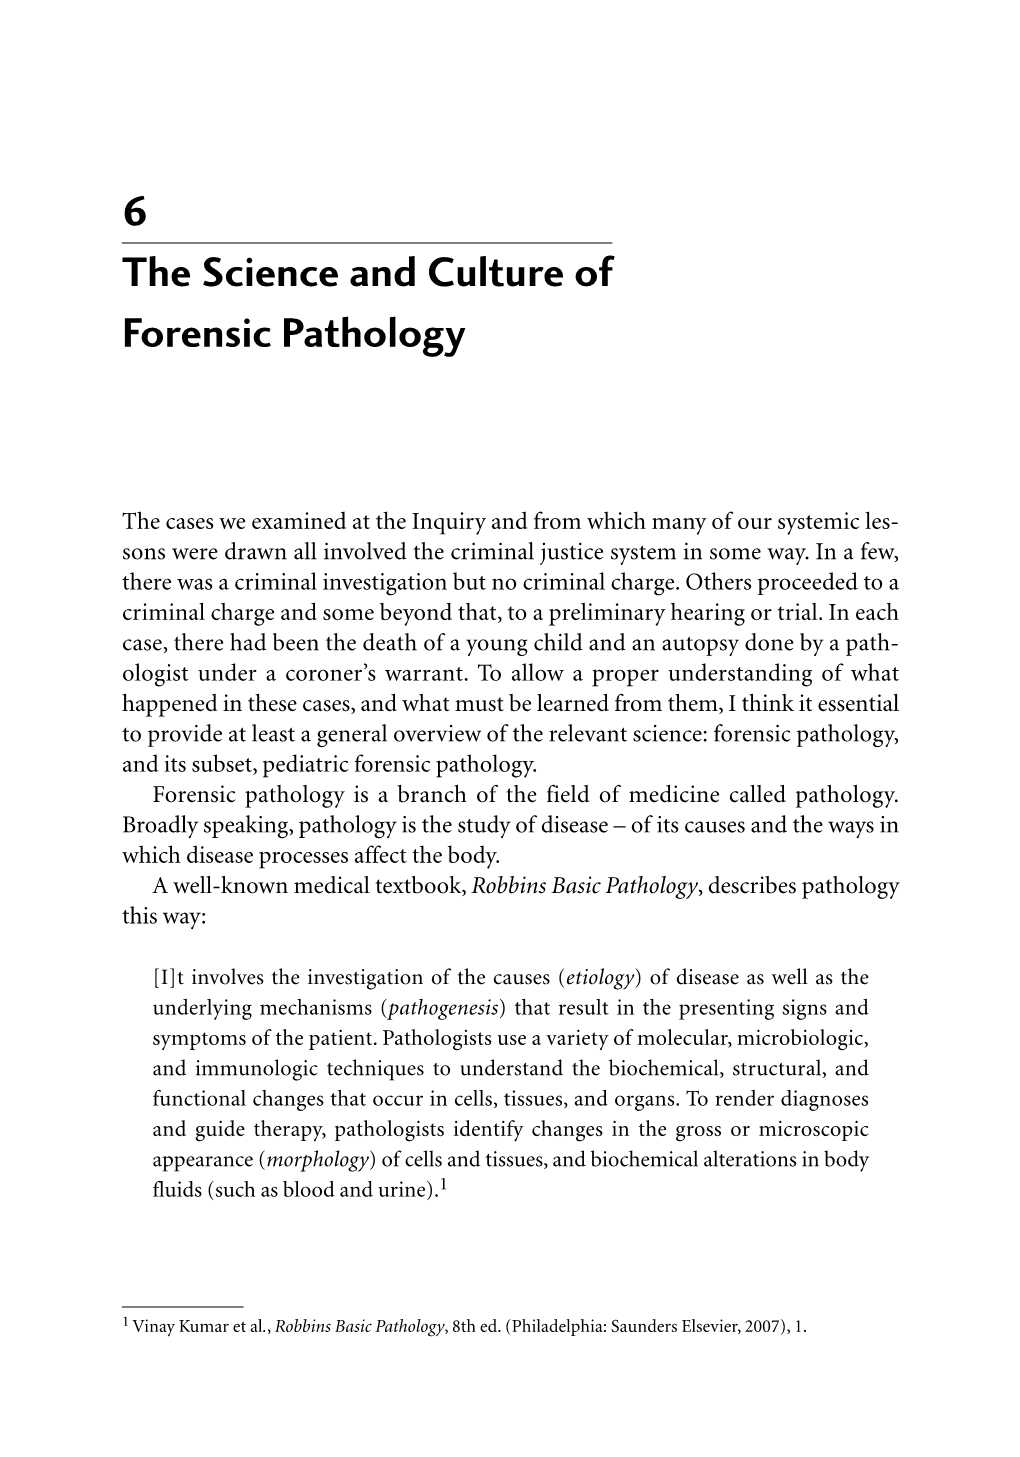 The Science and Culture of Forensic Pathology